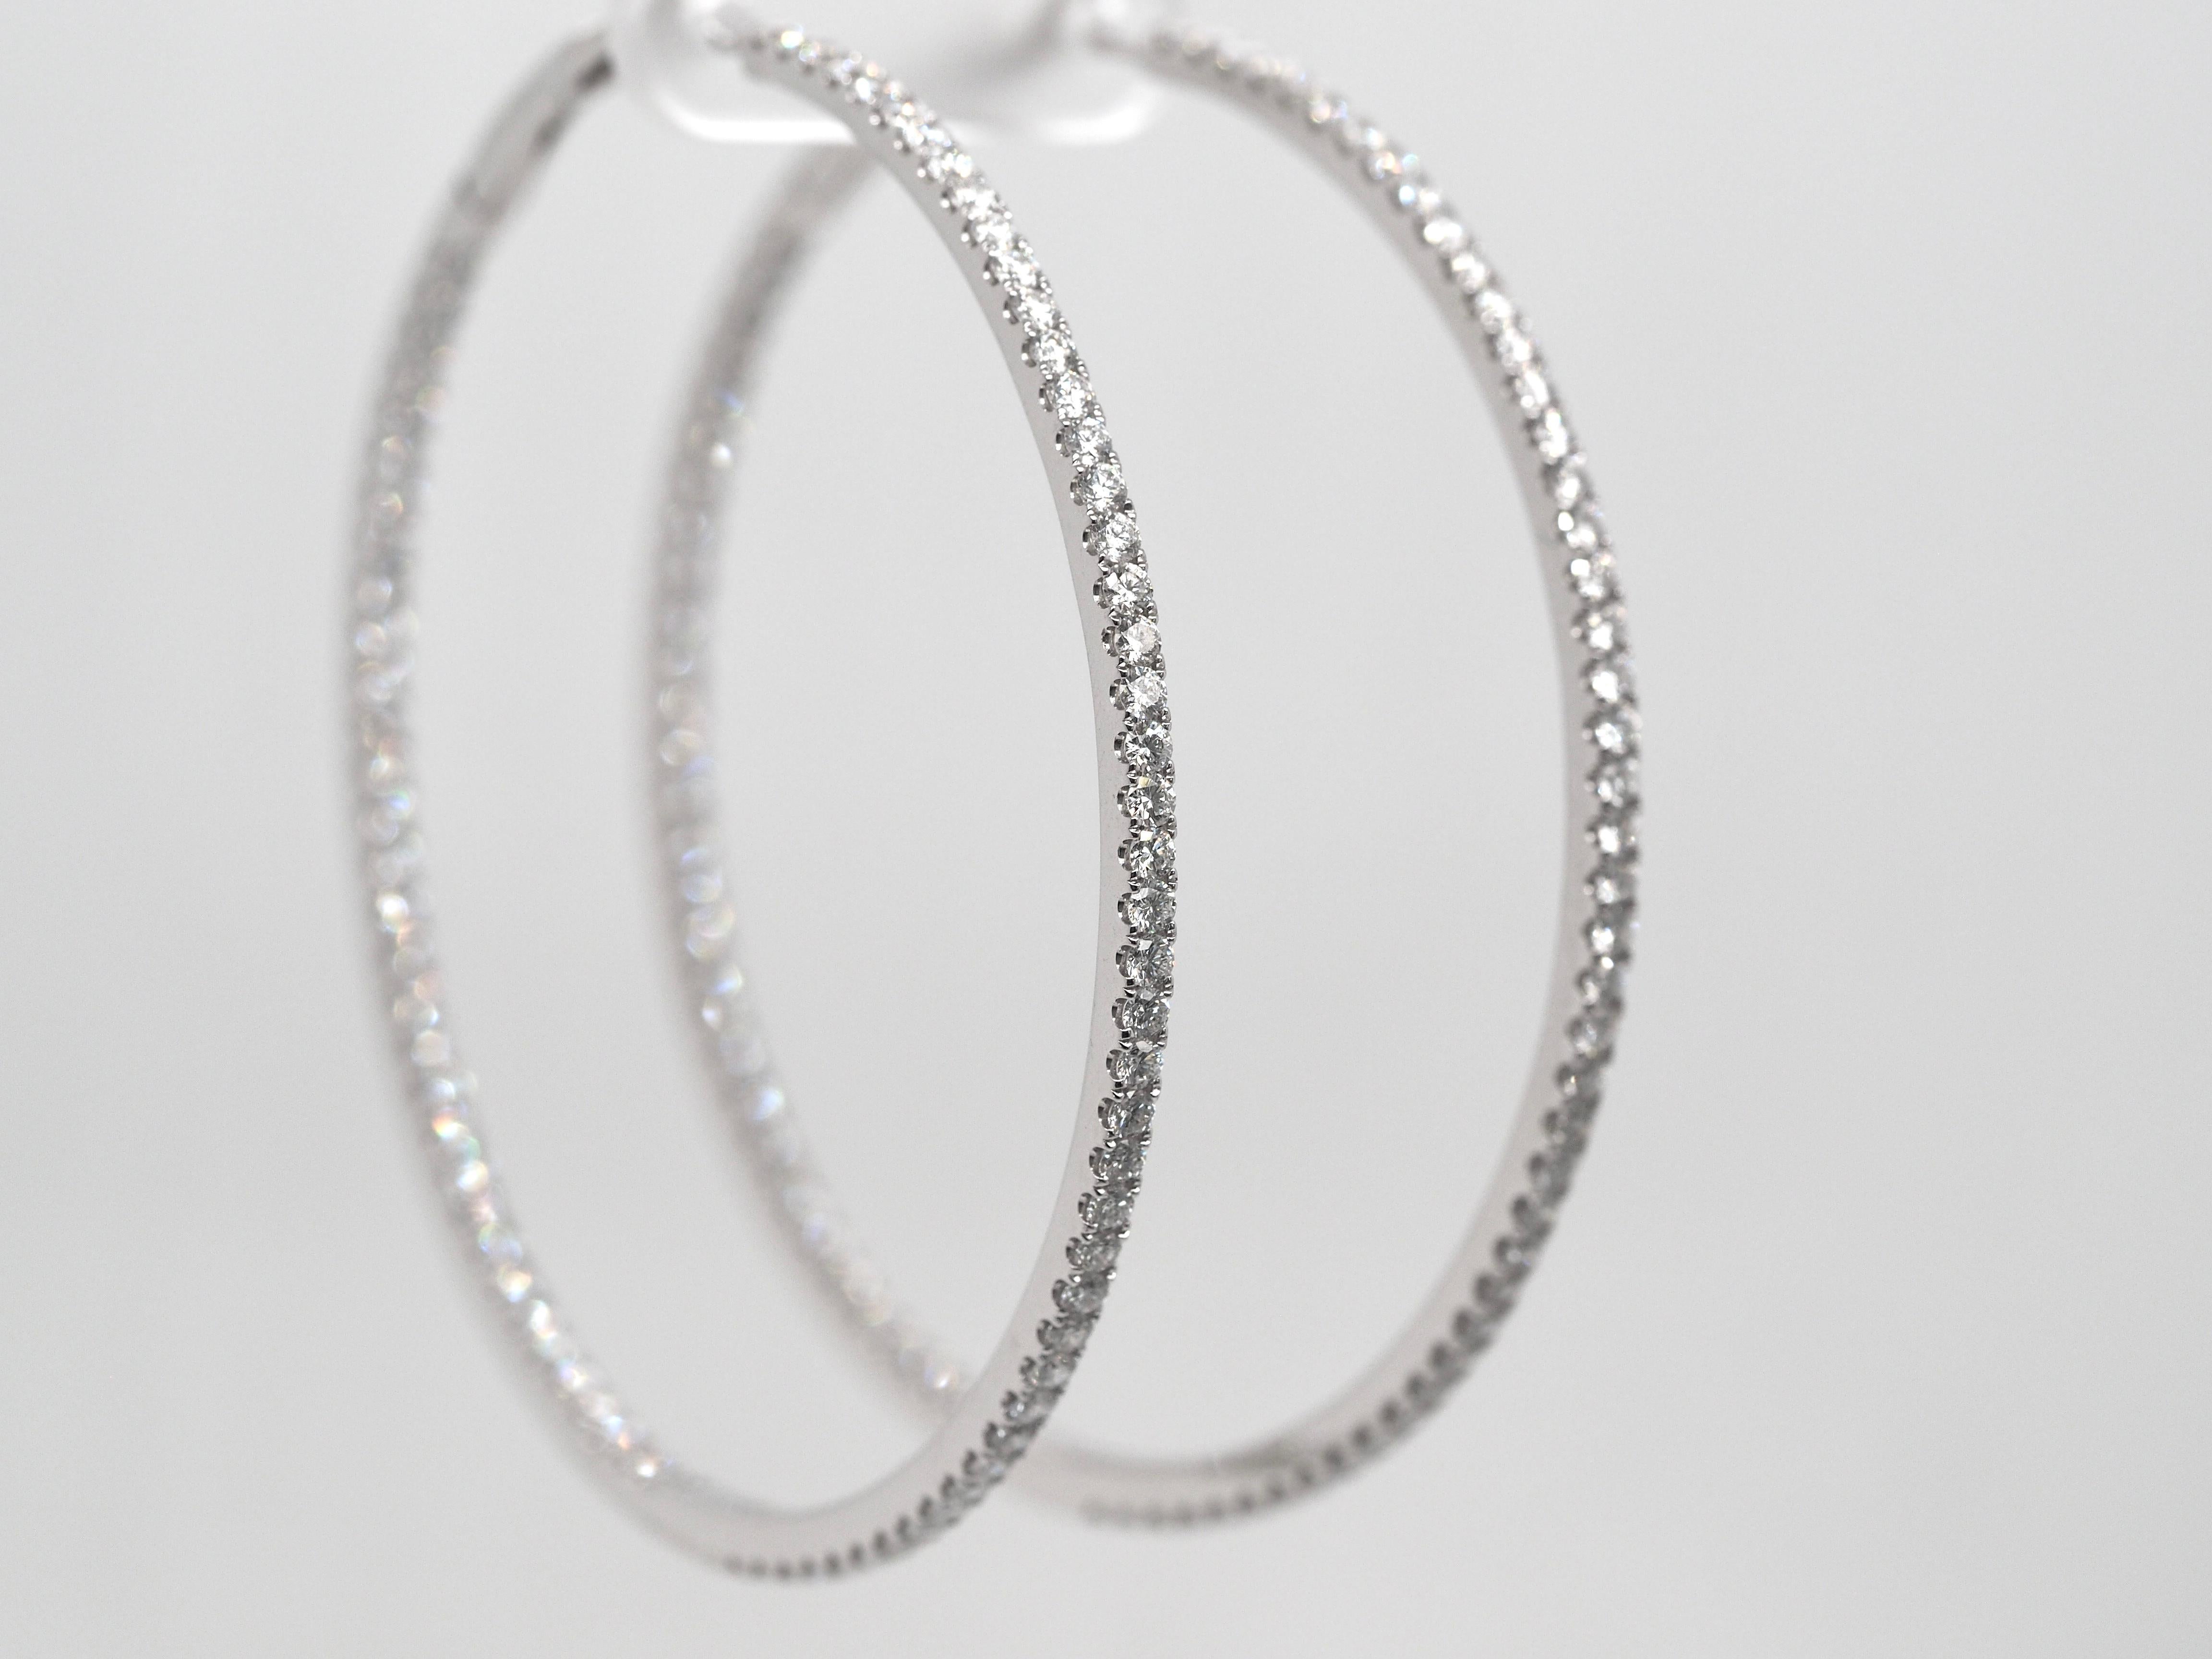 These breathtaking hoop earrings are such a staple piece to anyone's collection. They have incredible round cut diamonds, on the inside and outside, to create an abstract effect, set in 18 karat white gold. They are brand ne earrings, perfect for